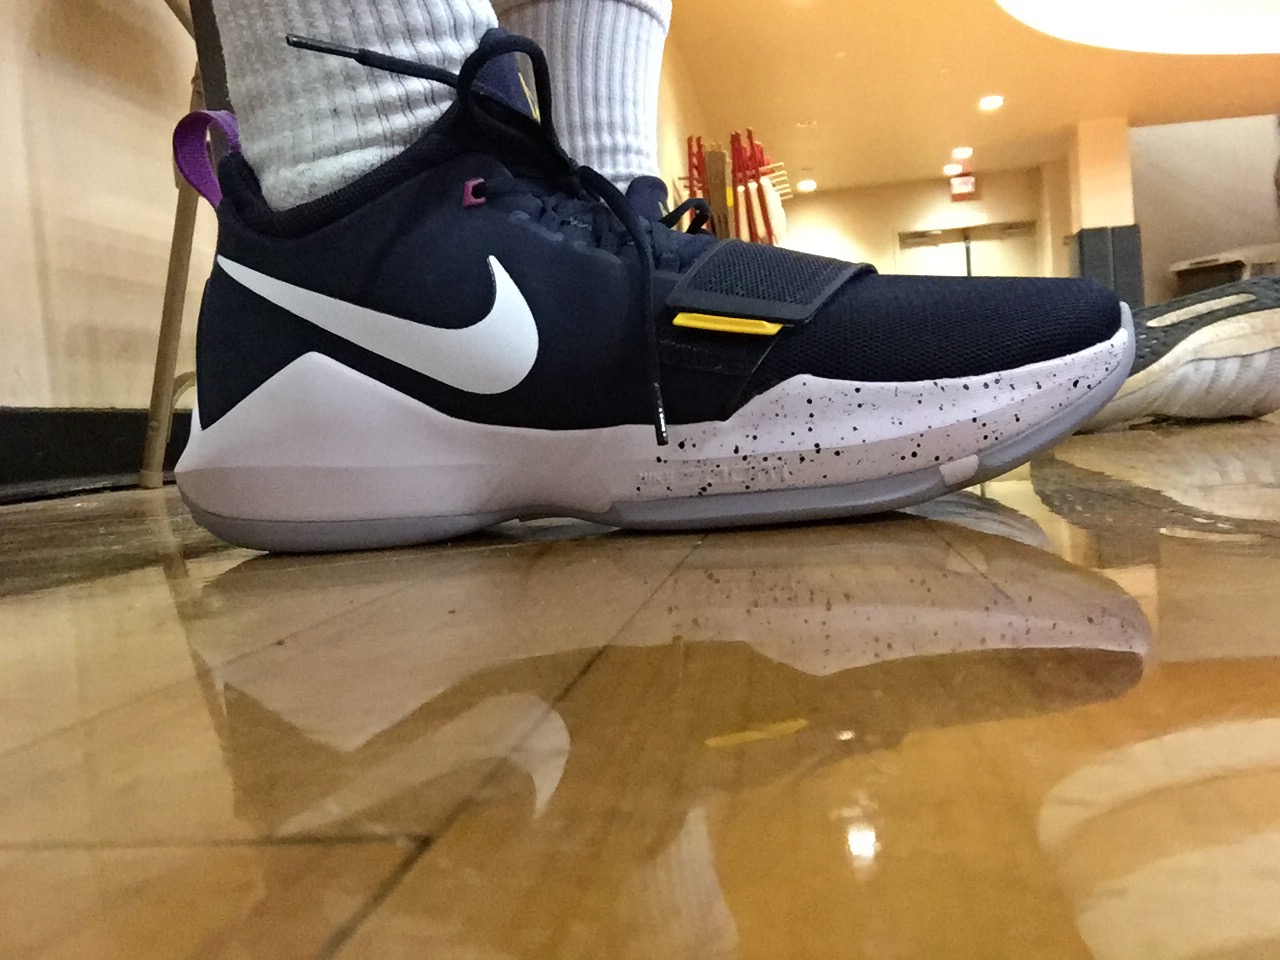 Nike PG1 Performance Analysis and Review | schwollo.com